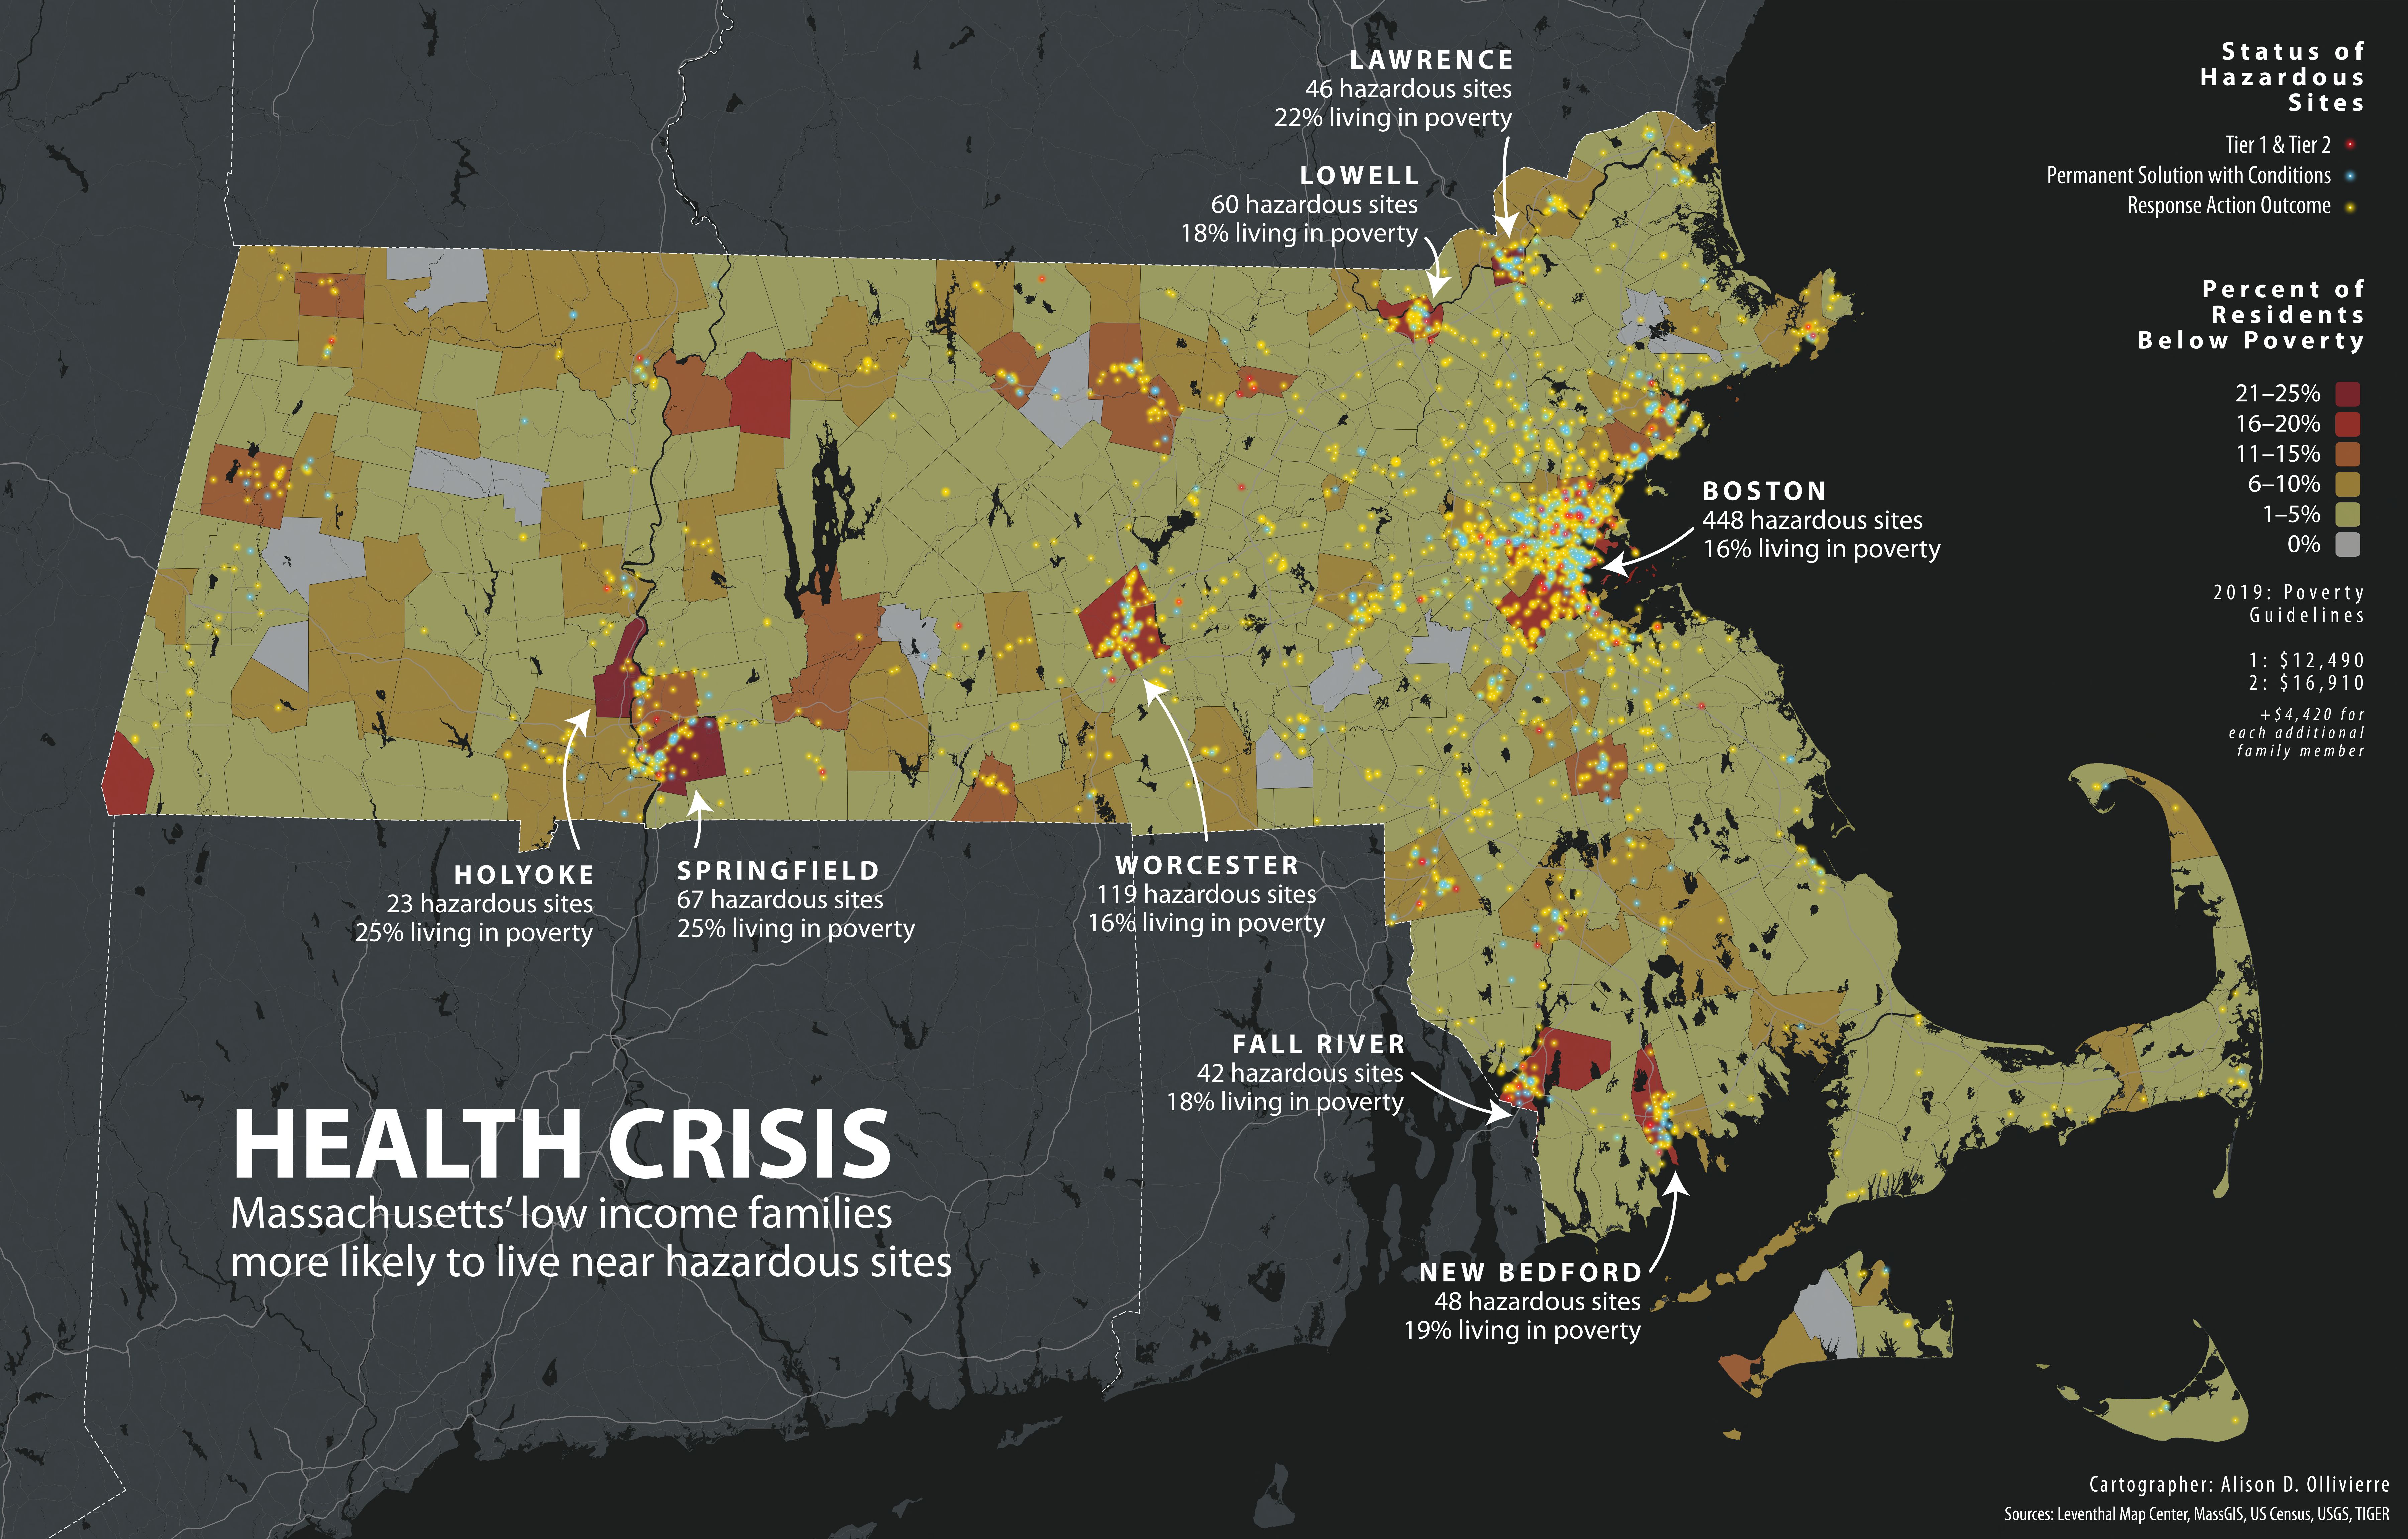 A map showing health conditions across Massachusetts and locations of chemical waste sites